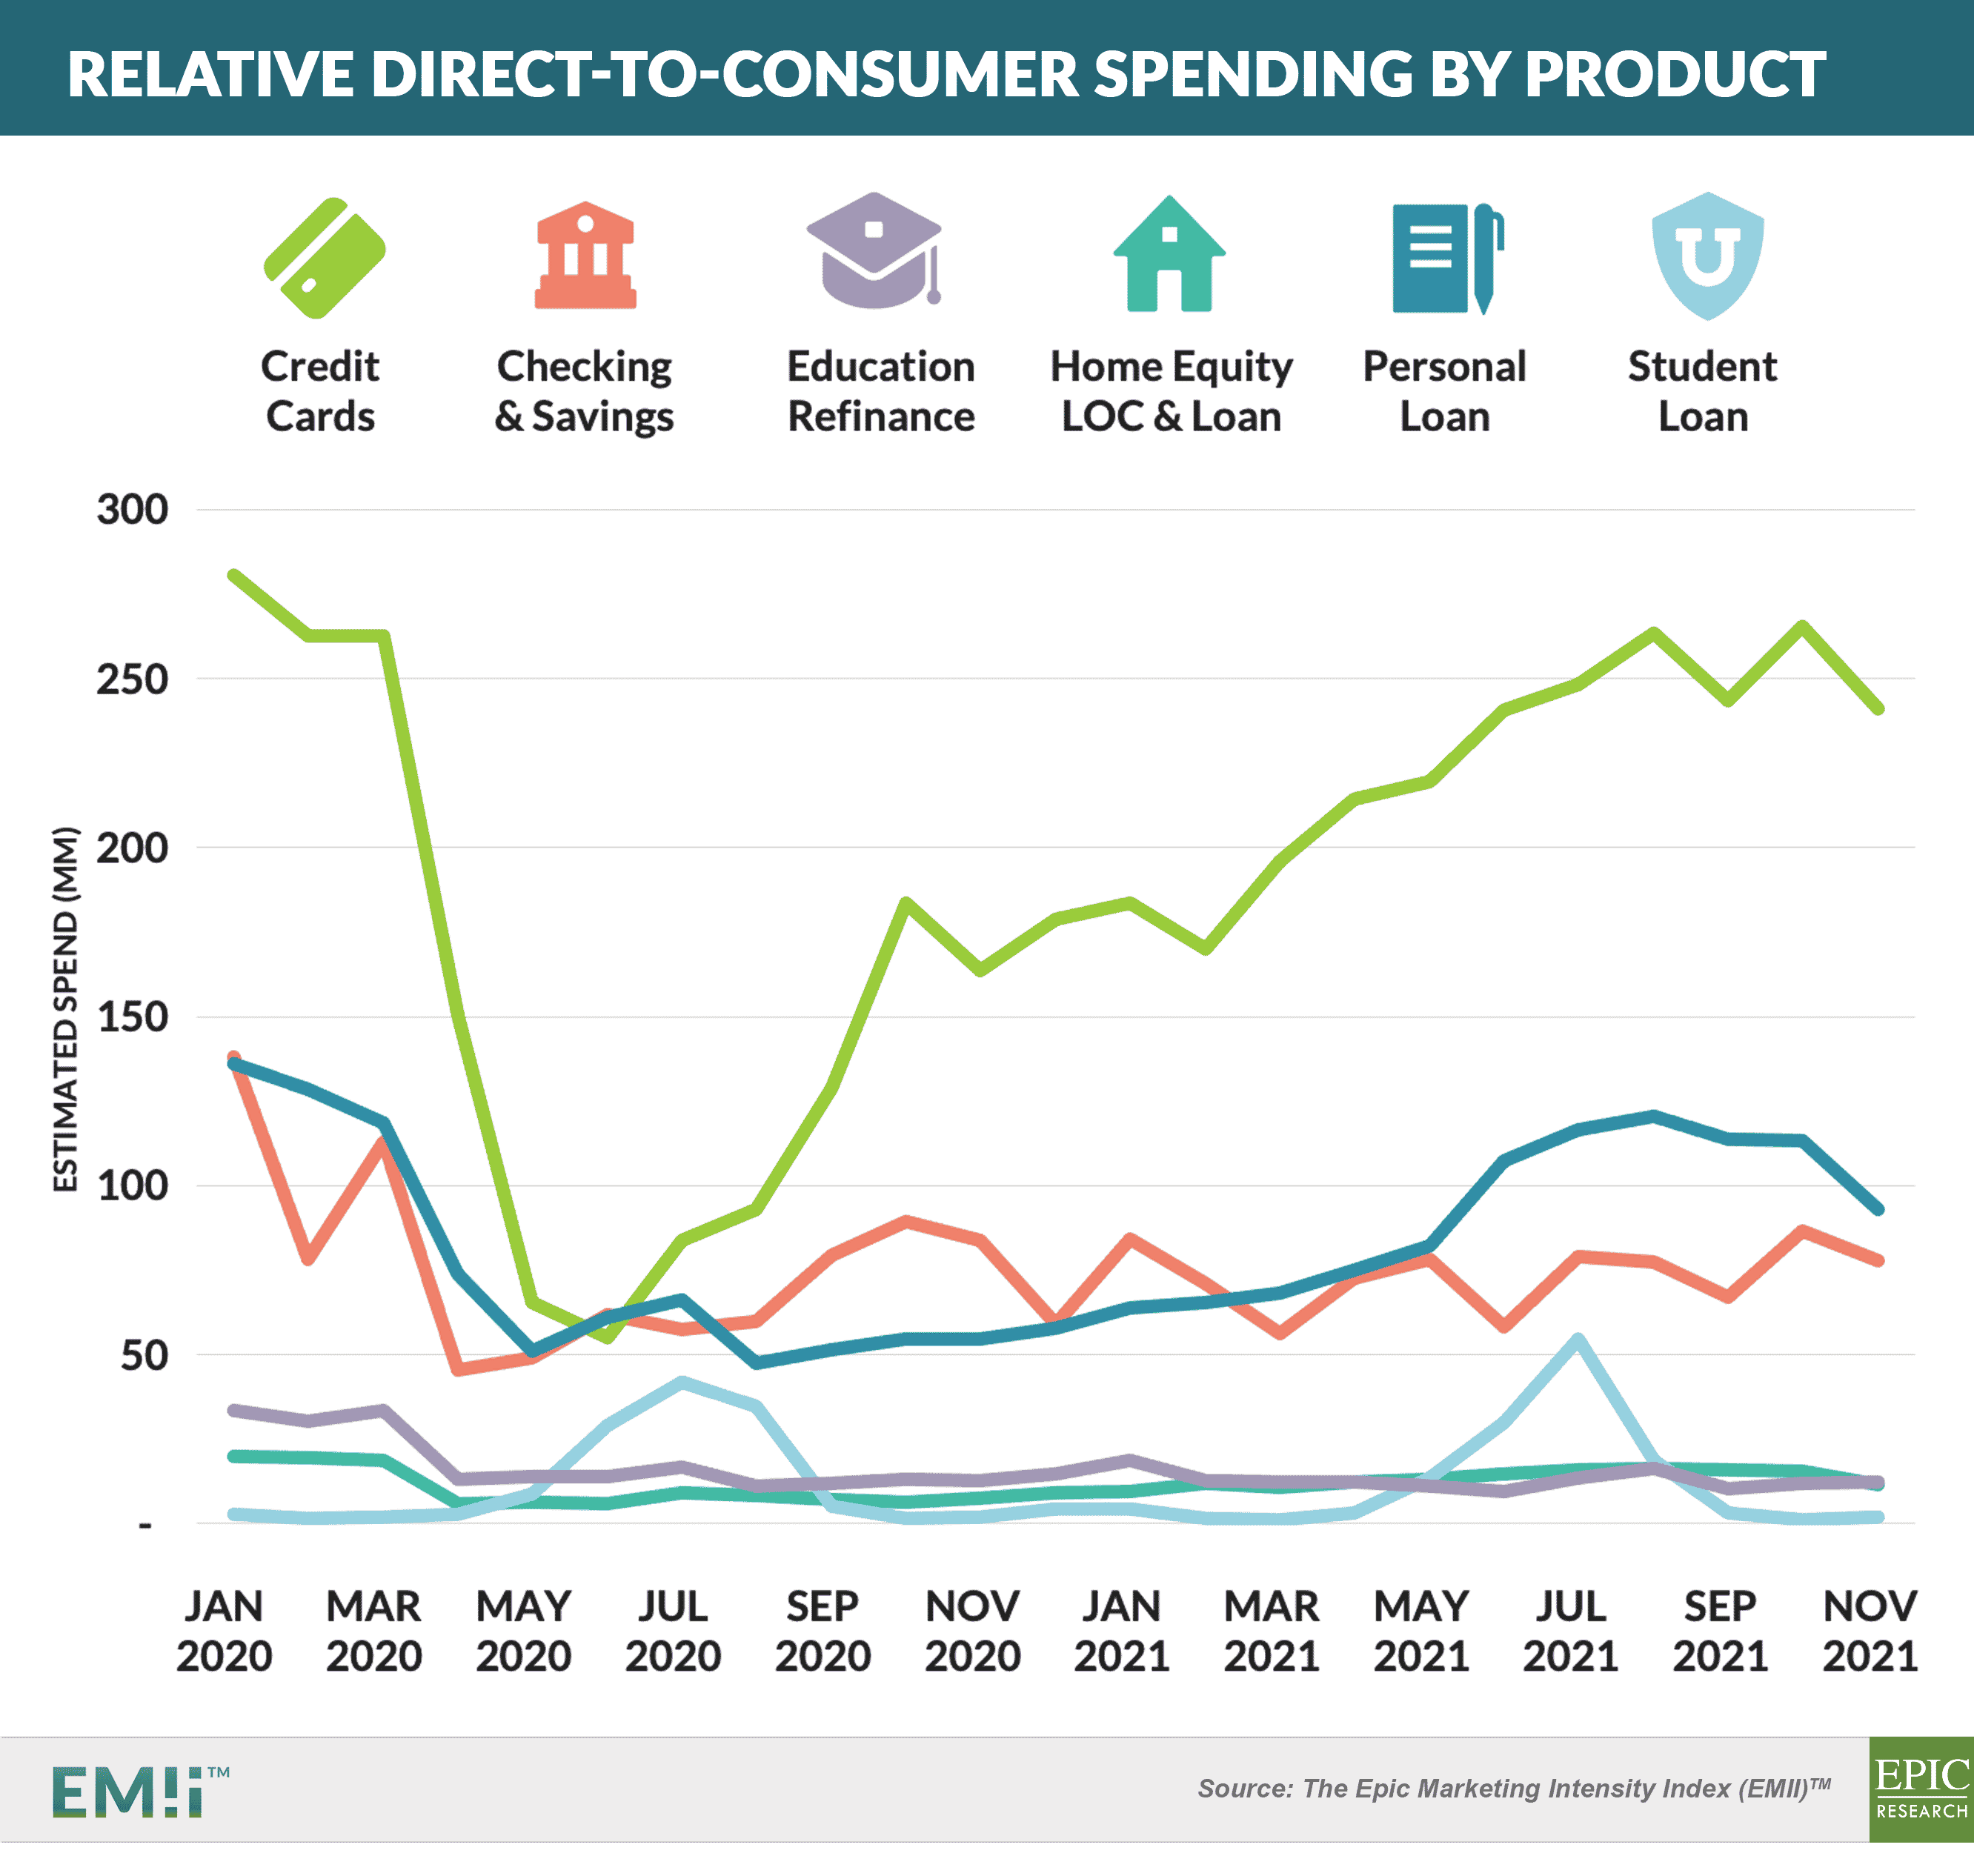 EMII - Relative Direct-to-Consumer Spending by Product 20220108